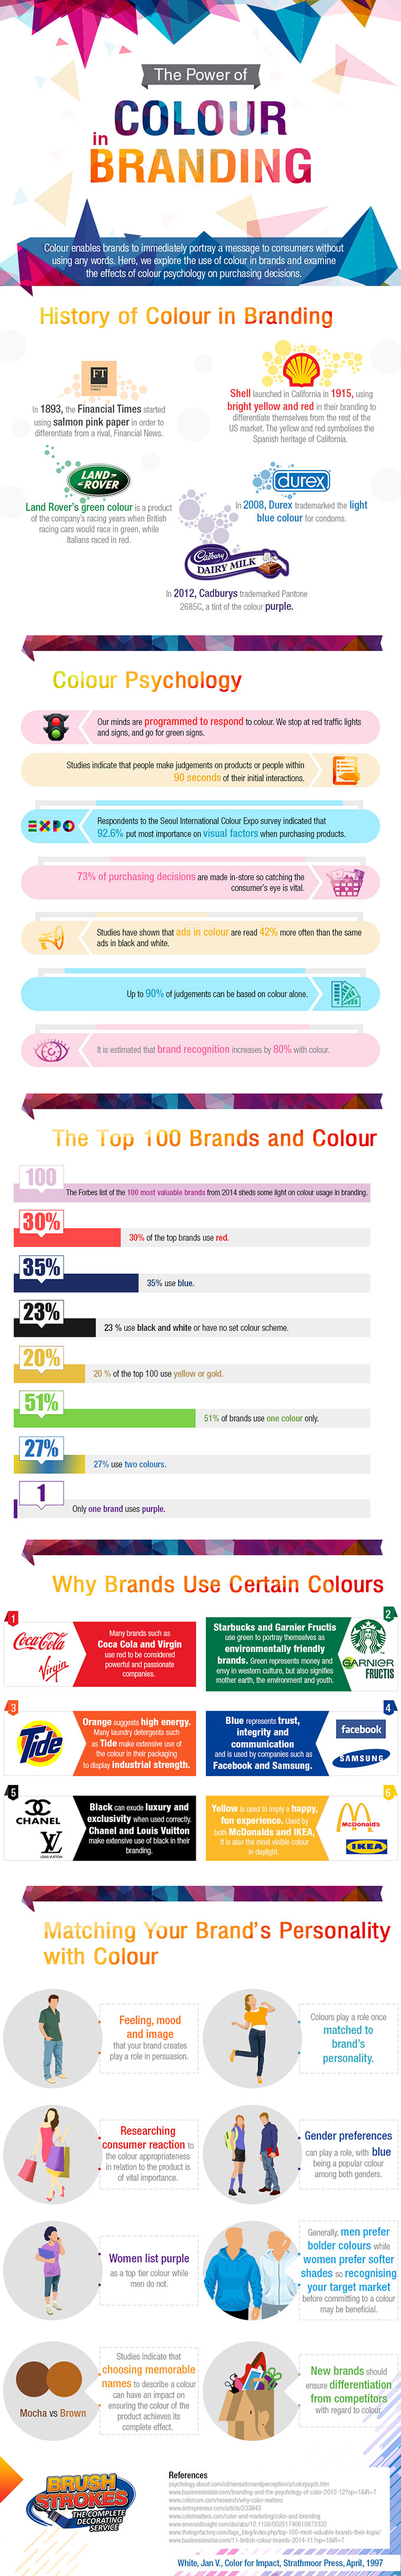 The-Power-of-Colour-in-Branding-Infographic